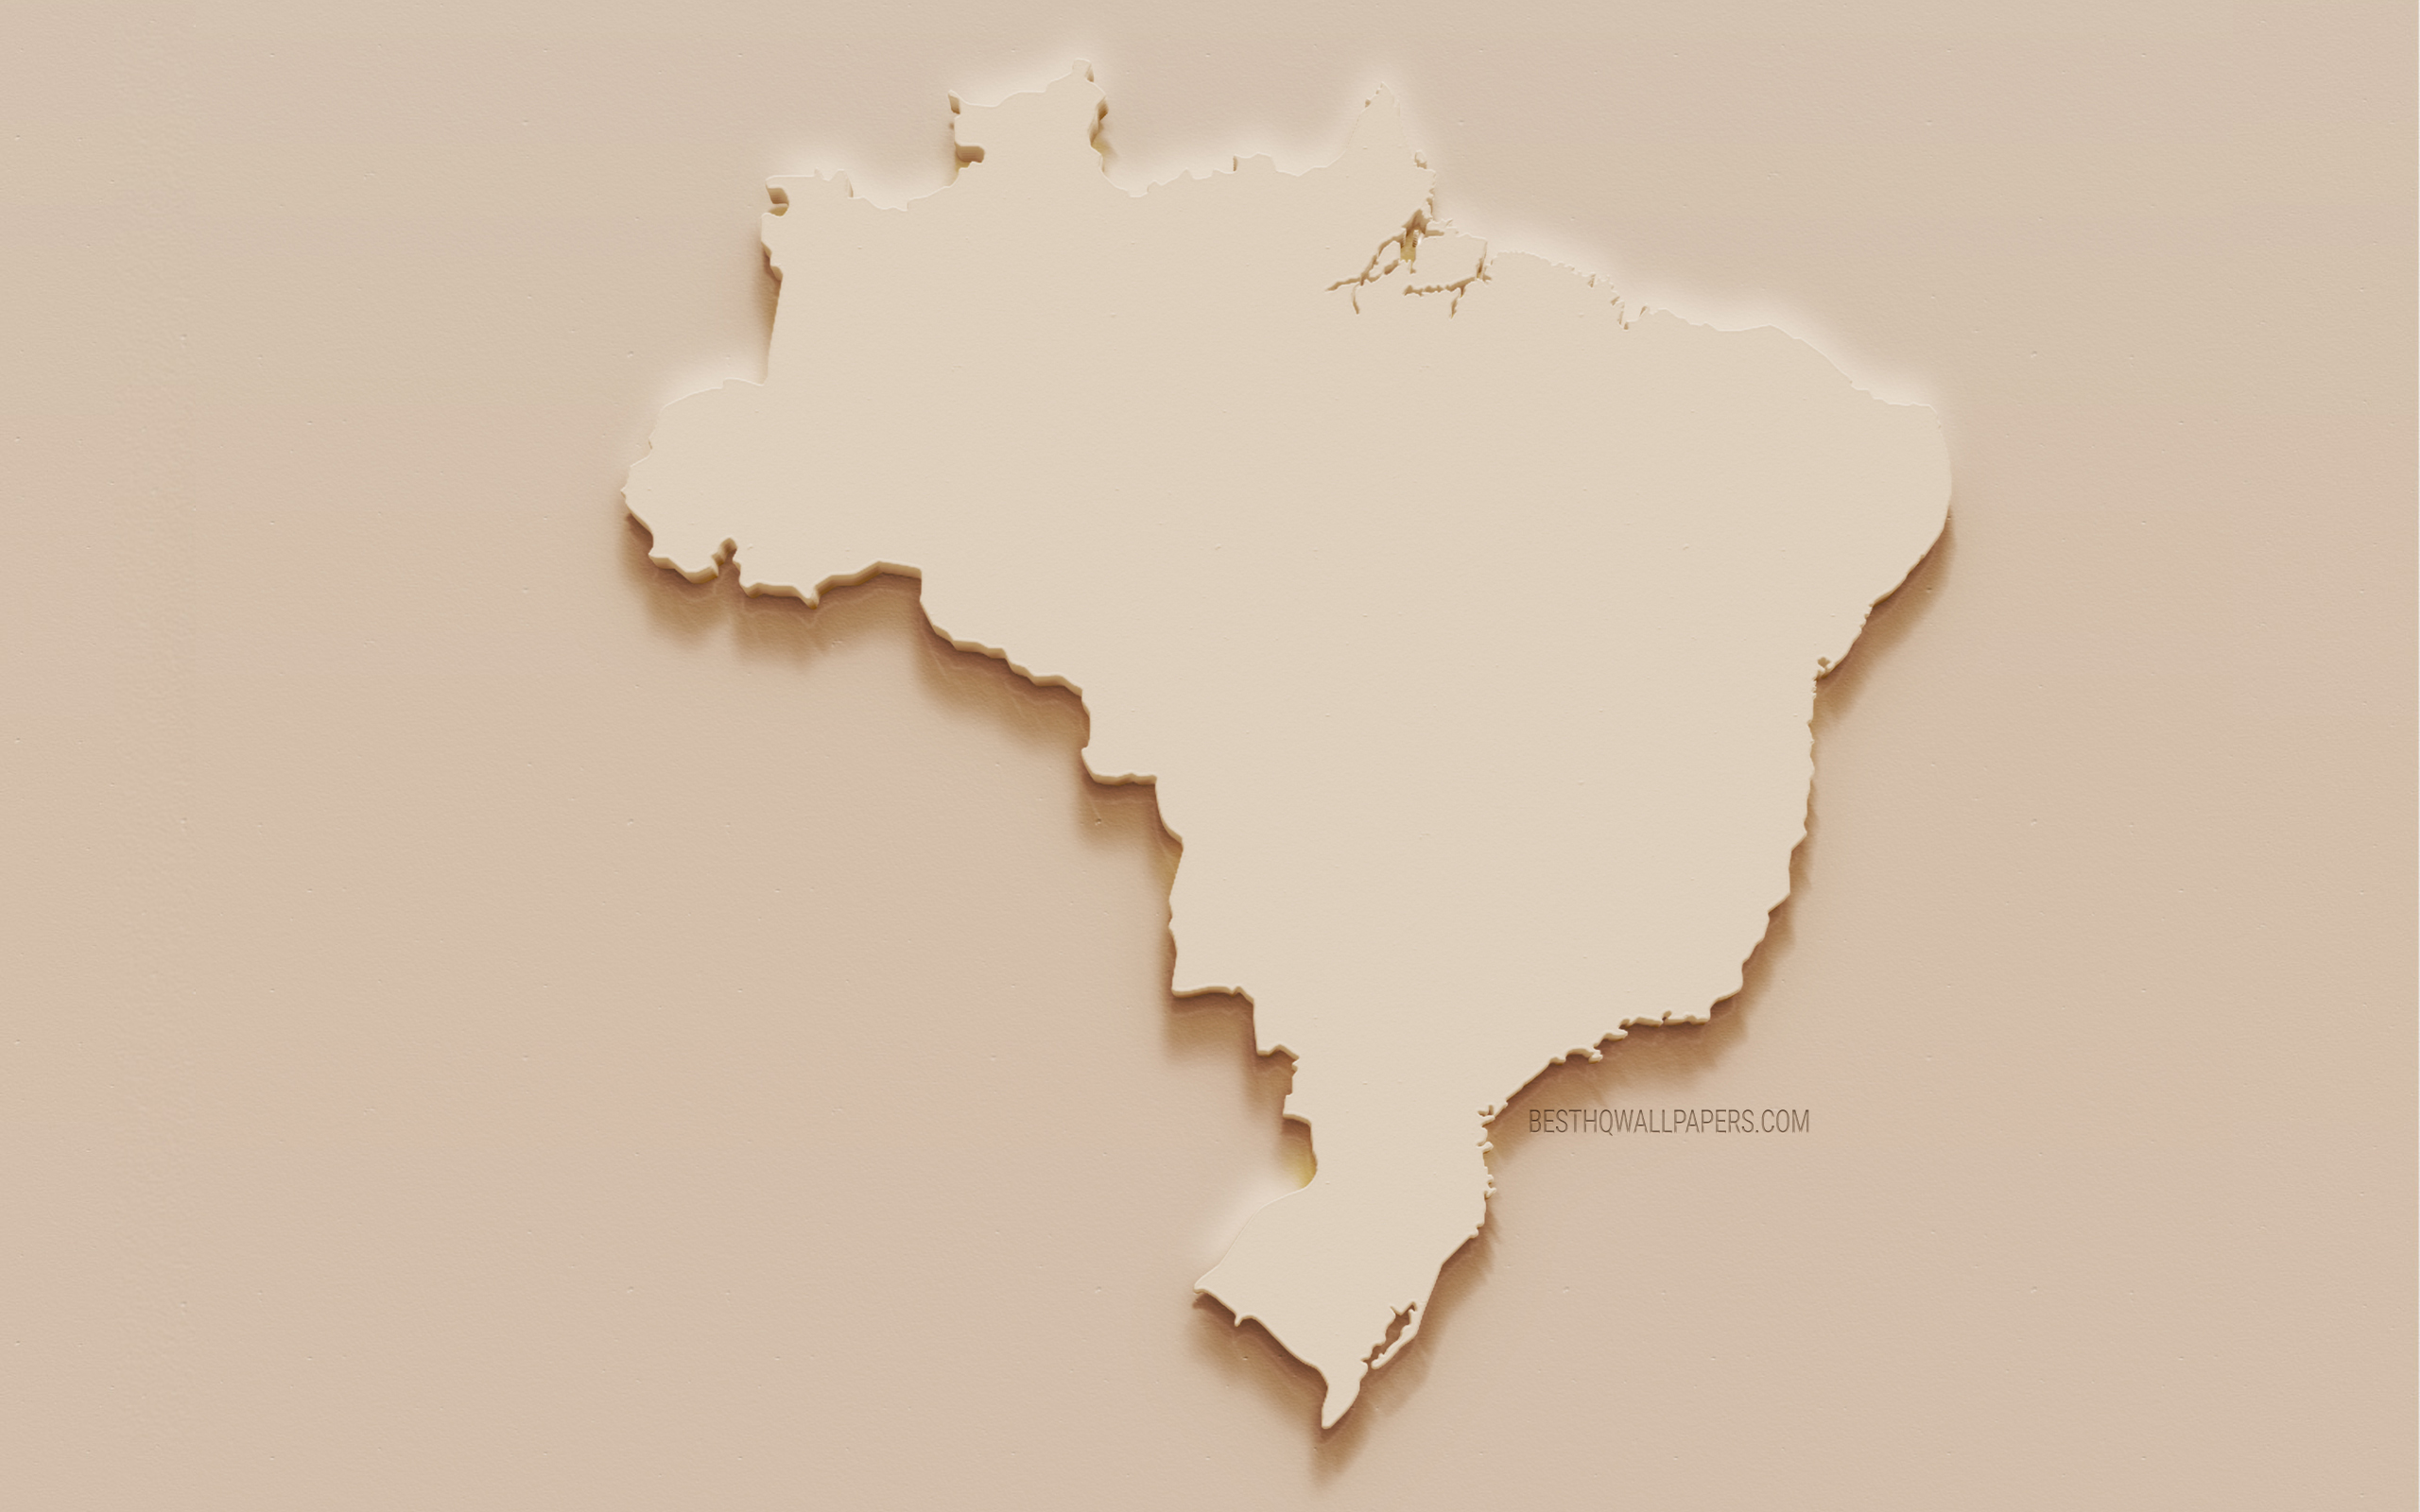 Download wallpaper Brazil map, 3D silhouette of Brazil map, plaster map of Brazil, brown stone background, Brazil, South America for desktop with resolution 2560x1600. High Quality HD picture wallpaper